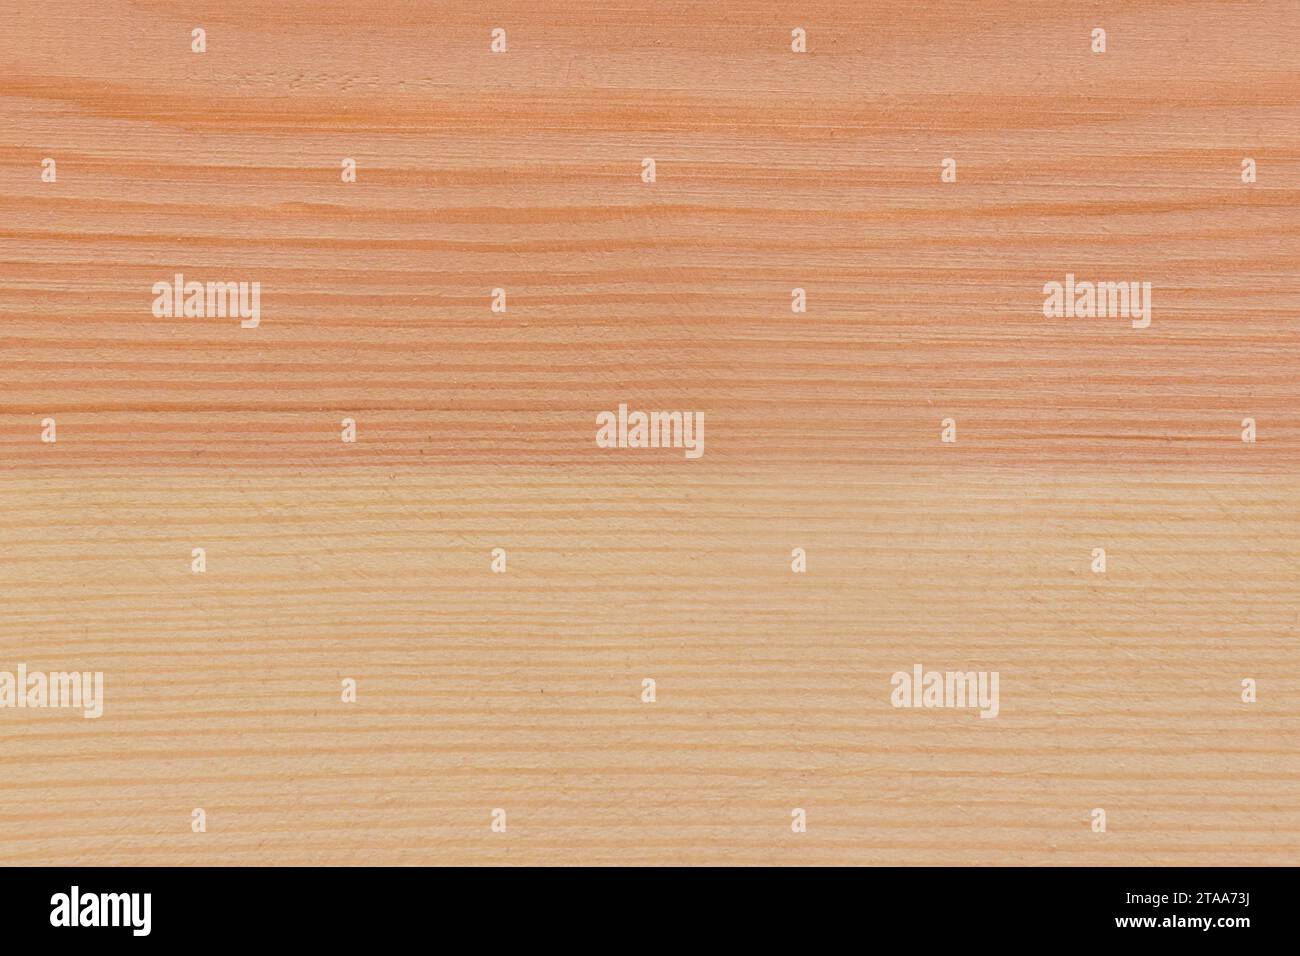 Color Warm Shade Wooden Table Texture Abstract Natural Pattern Wood Background Plank. Stock Photo